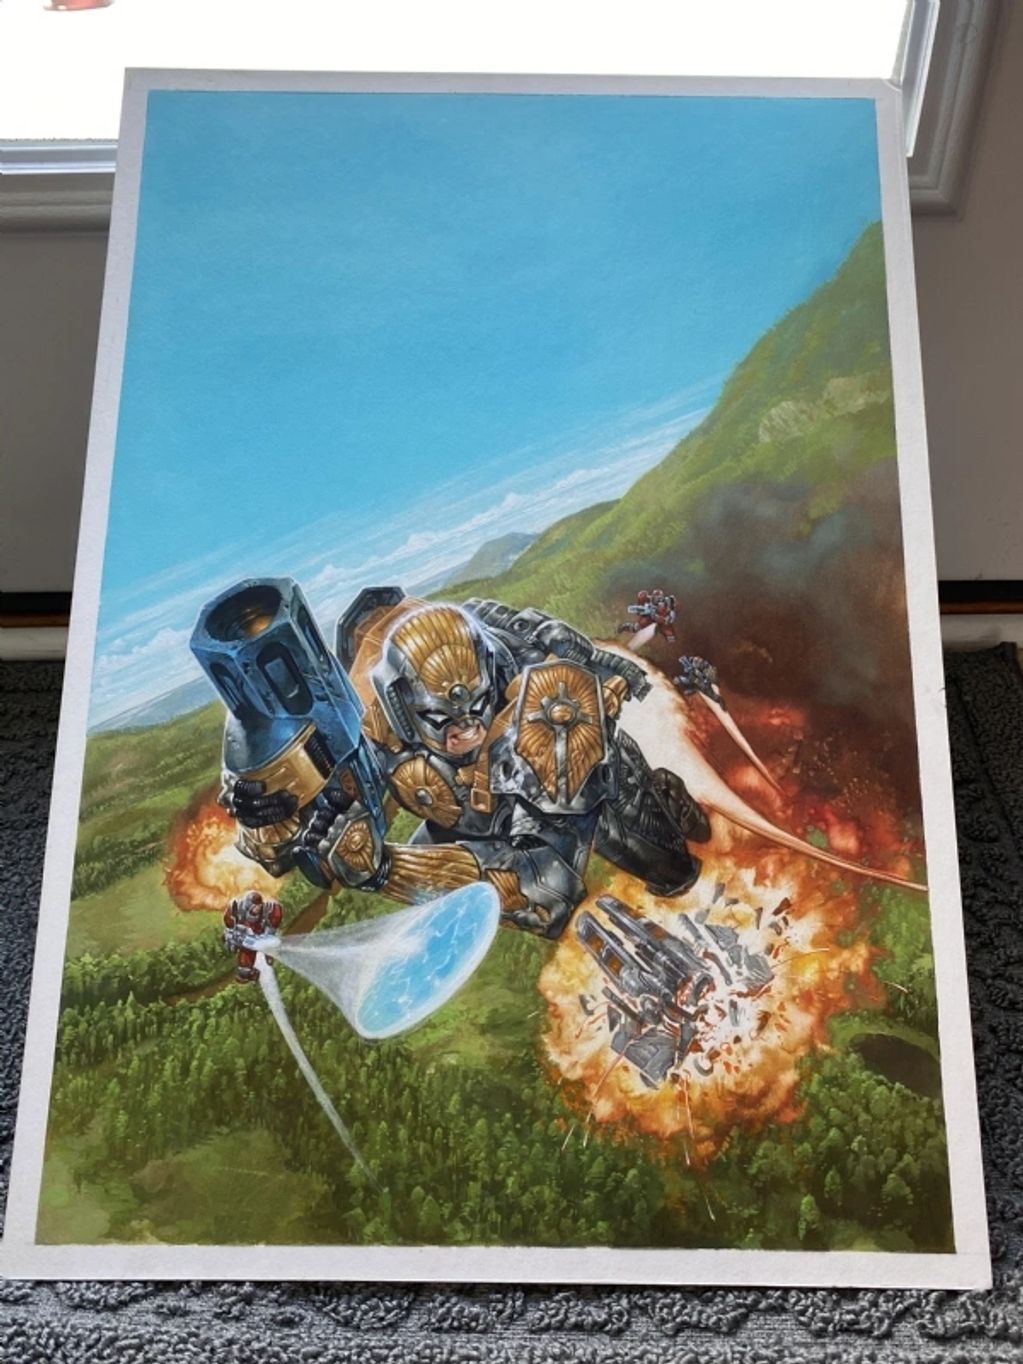 Pictured is the original front cover artwork for the game created by Dave Dorman. 